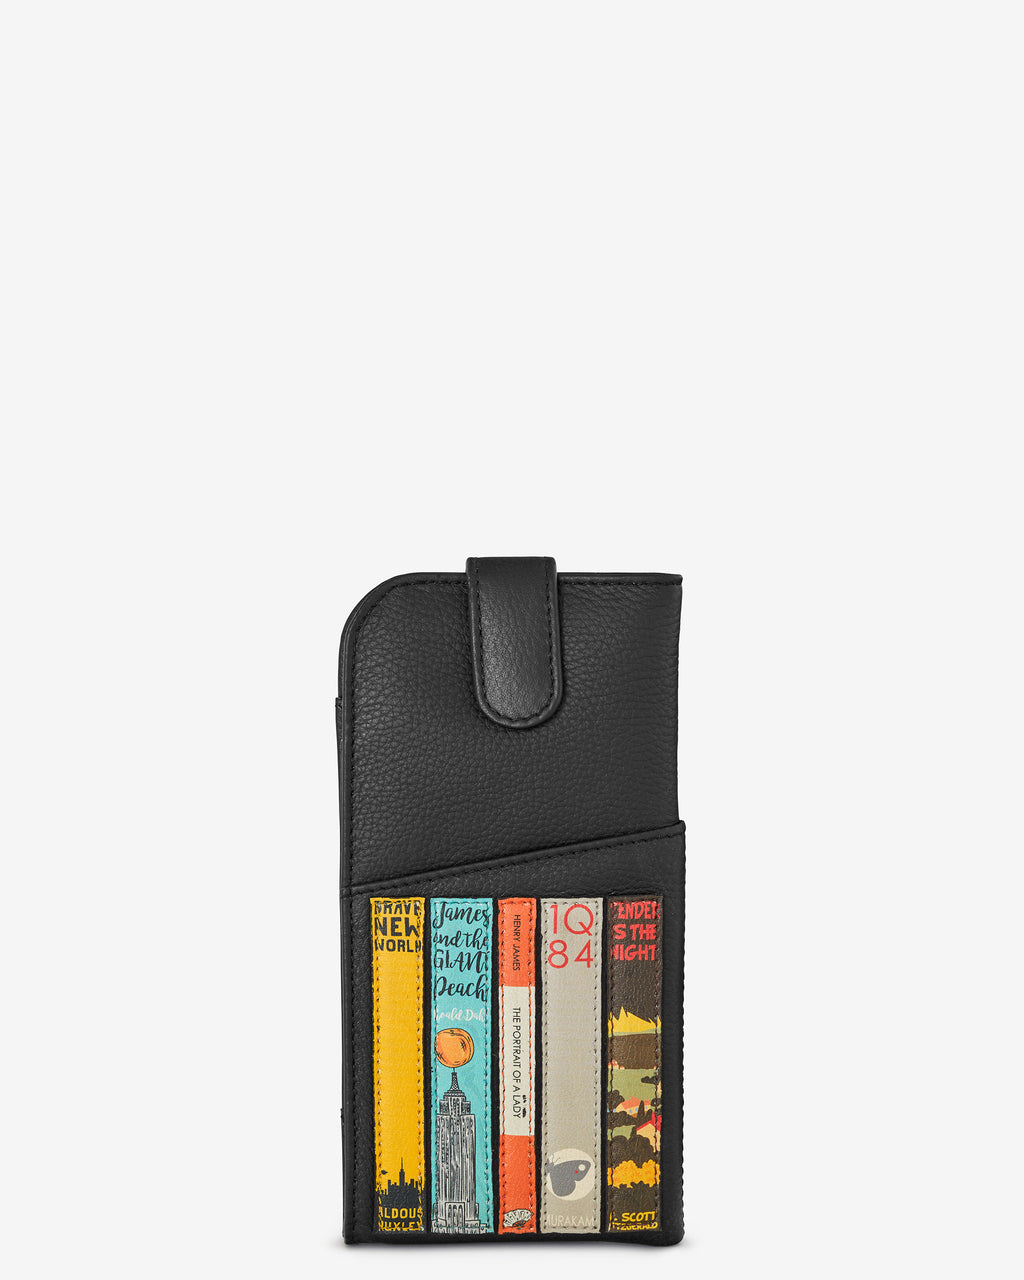 Bookworm Library Leather Glasses Case